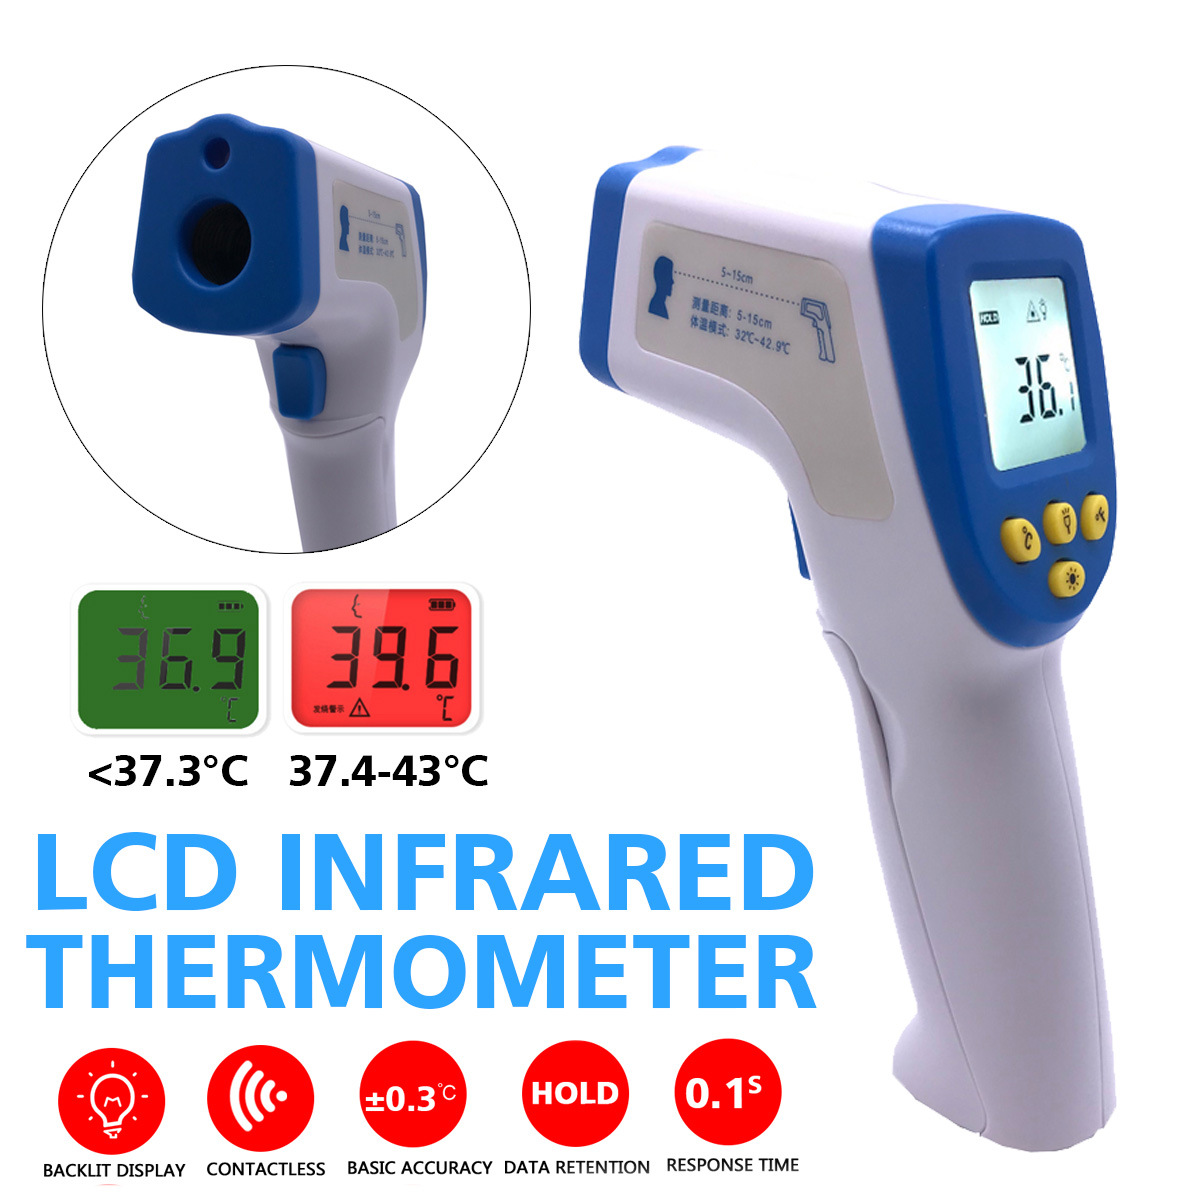 LCD-Digital-Non-contact-Touch-Infrared-Thermometer-Forehead-Temperature-Meter-1653228-1